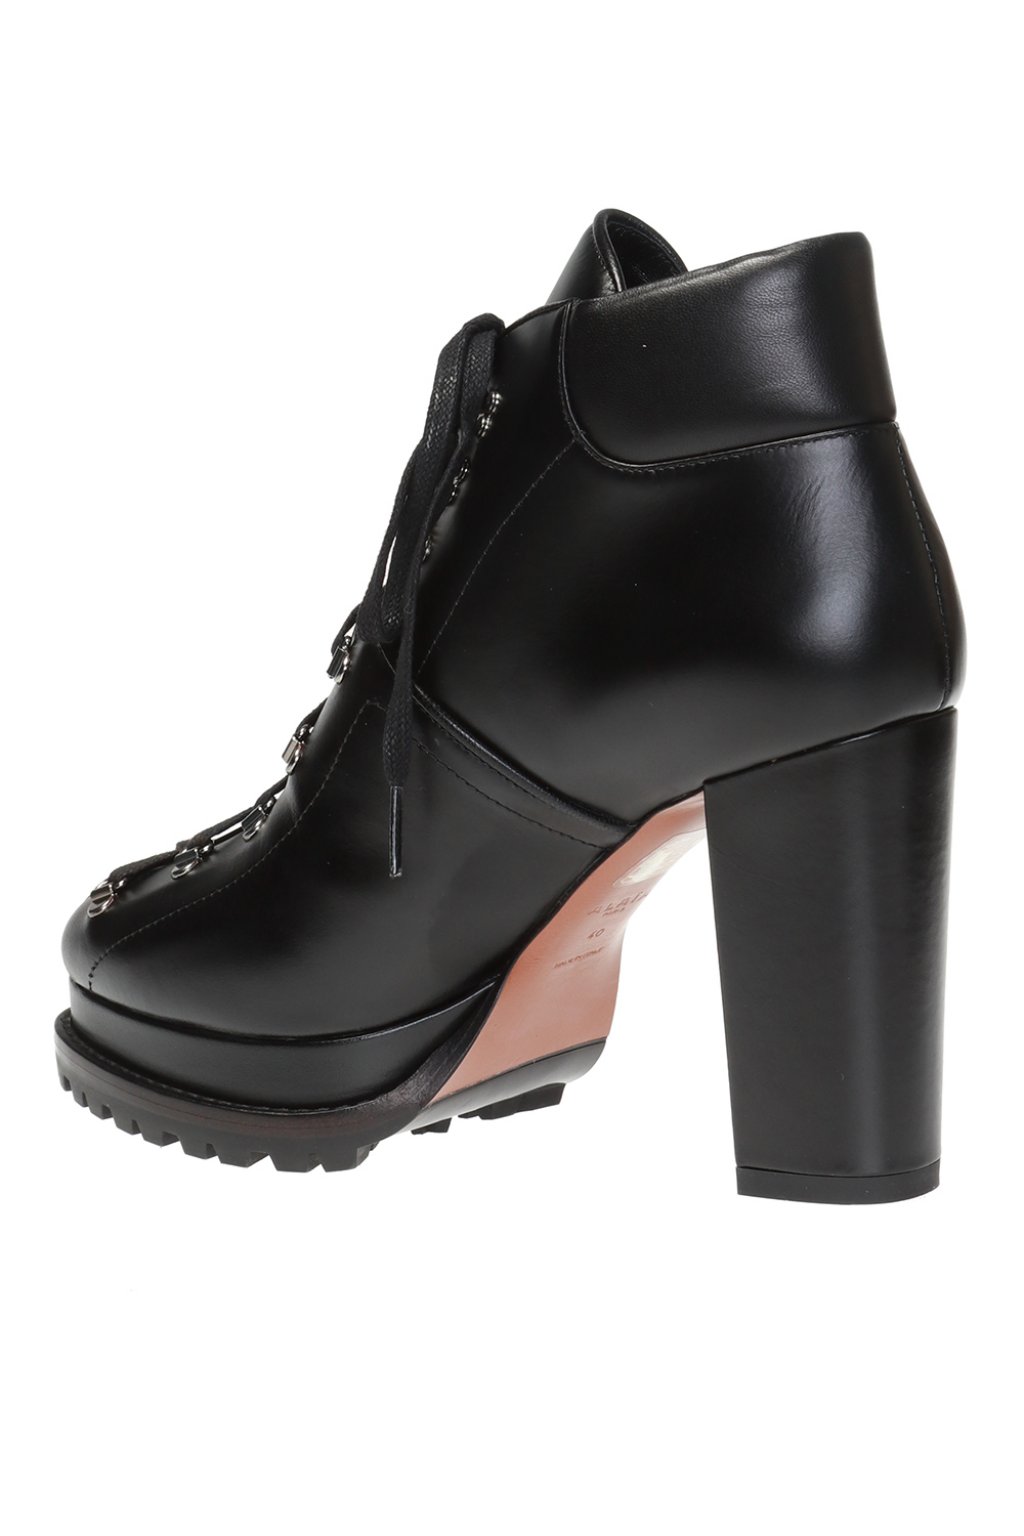 Alaia Platform ankle boots with stitching